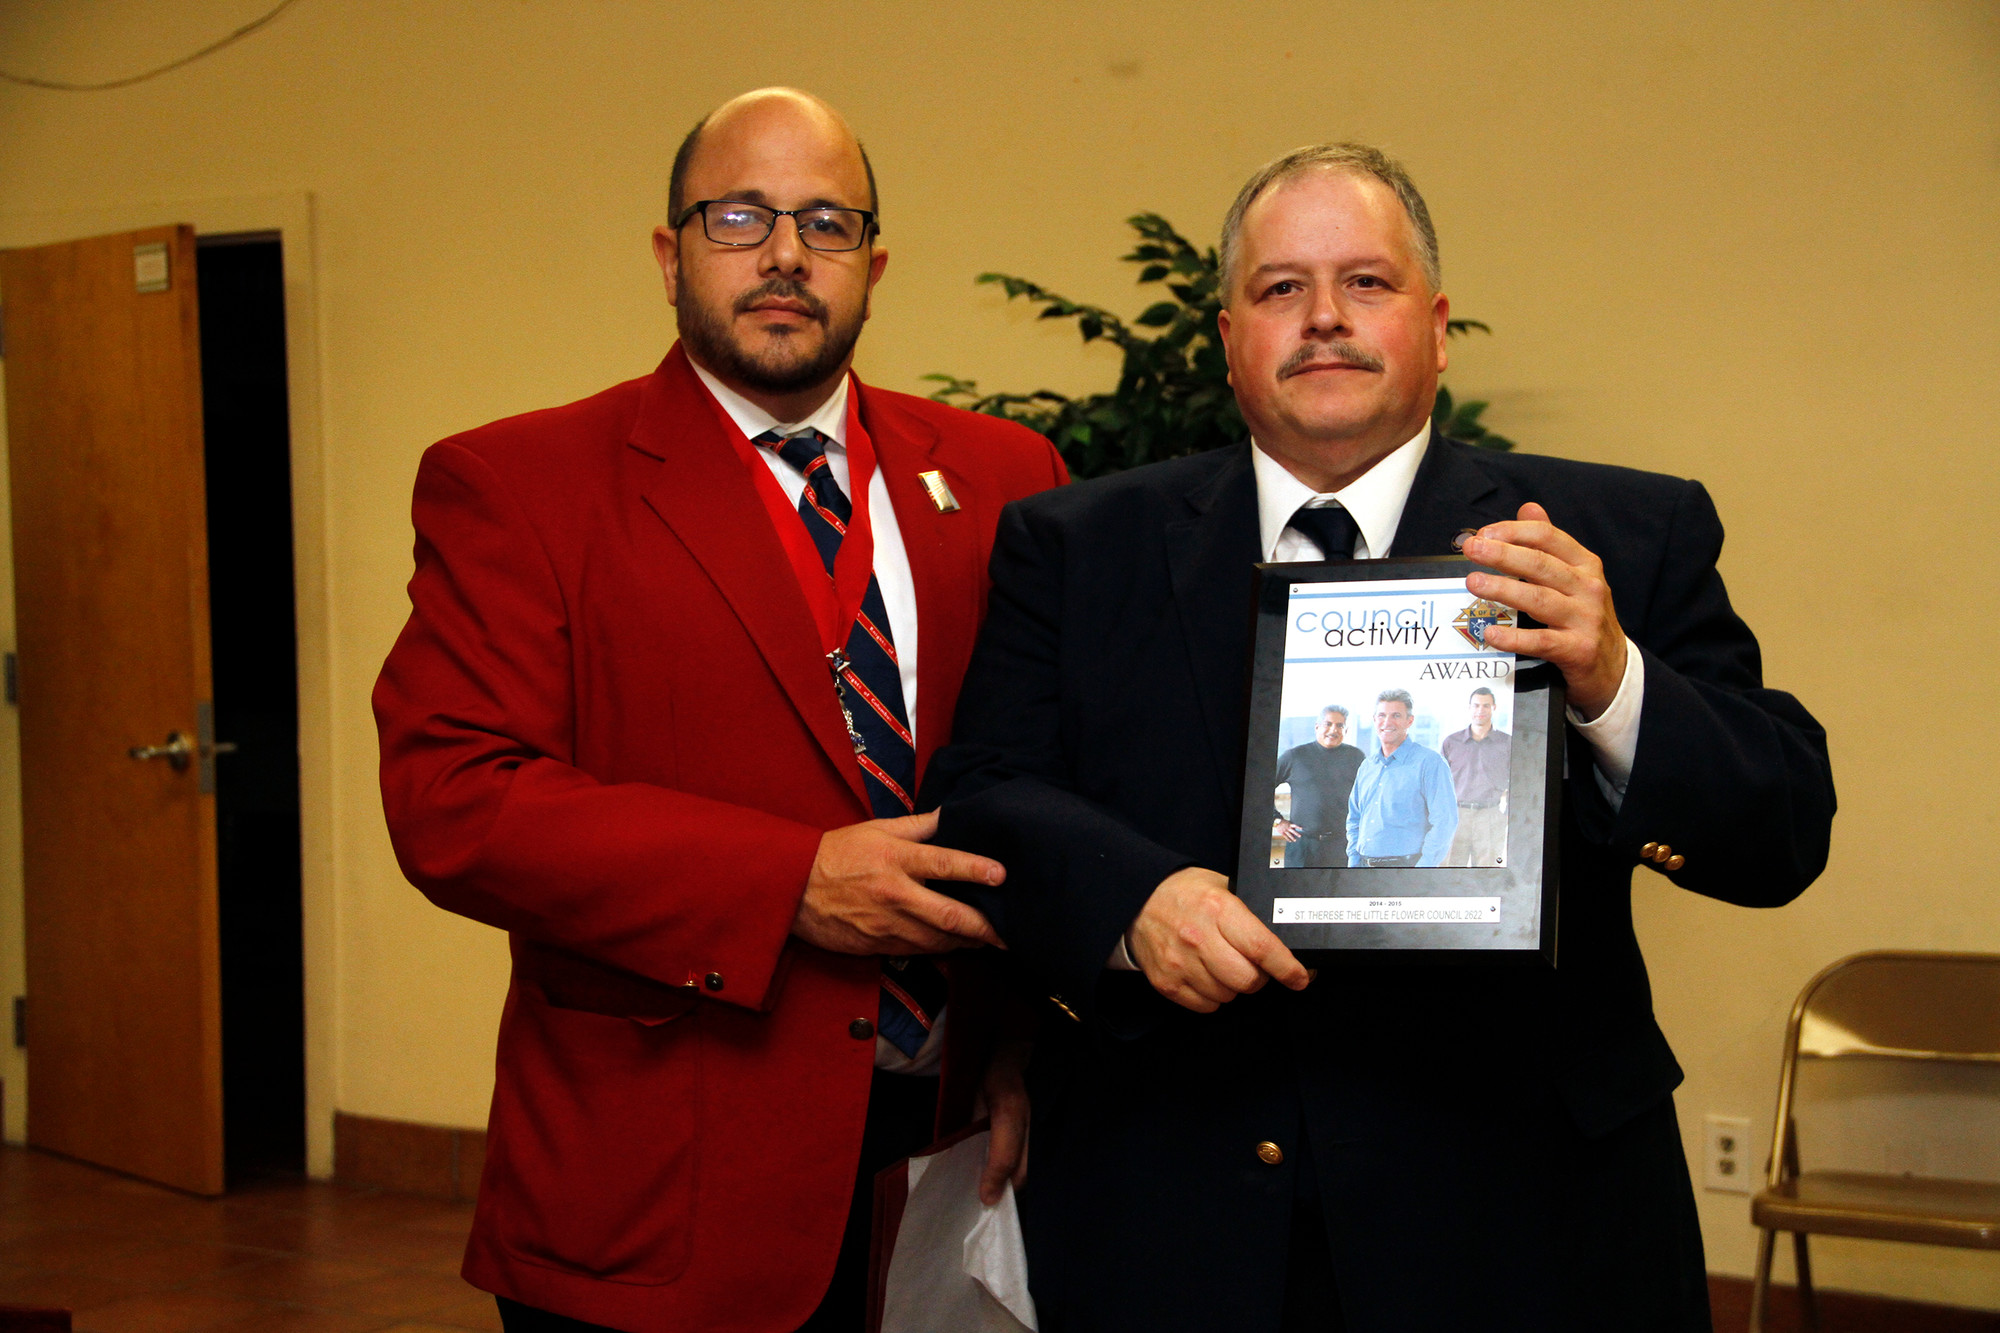 District Deputy Damiano Coraci, left, presented Grand Knight Larry Lombardo with the Council Activity award.